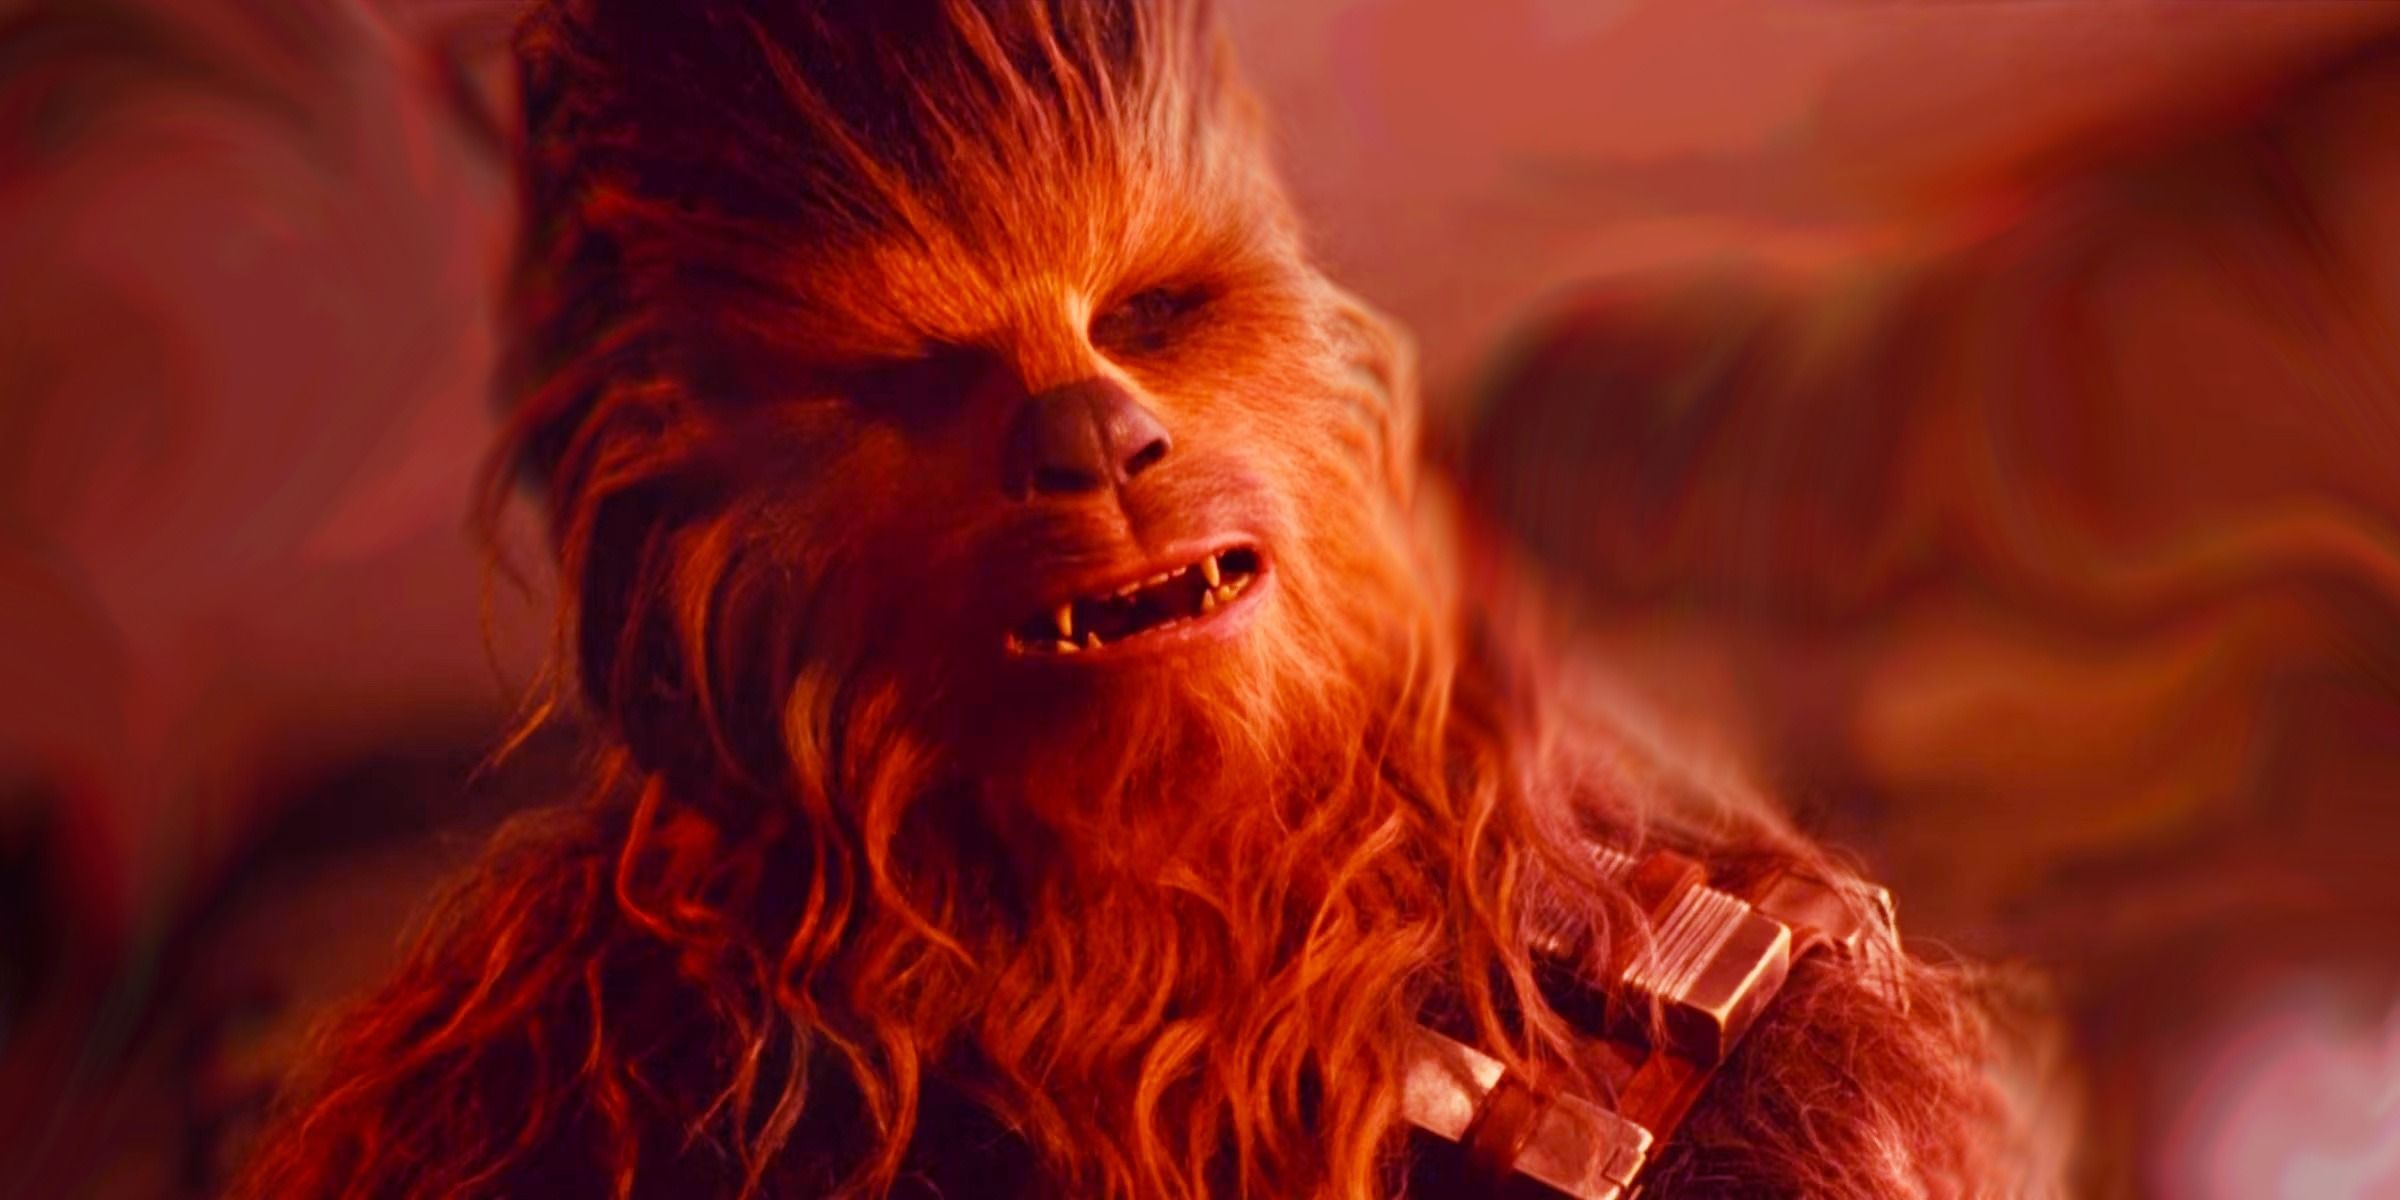 Chewbacca in Star Wars: The Rise of Skywalker looking angry in a vibrant red hue